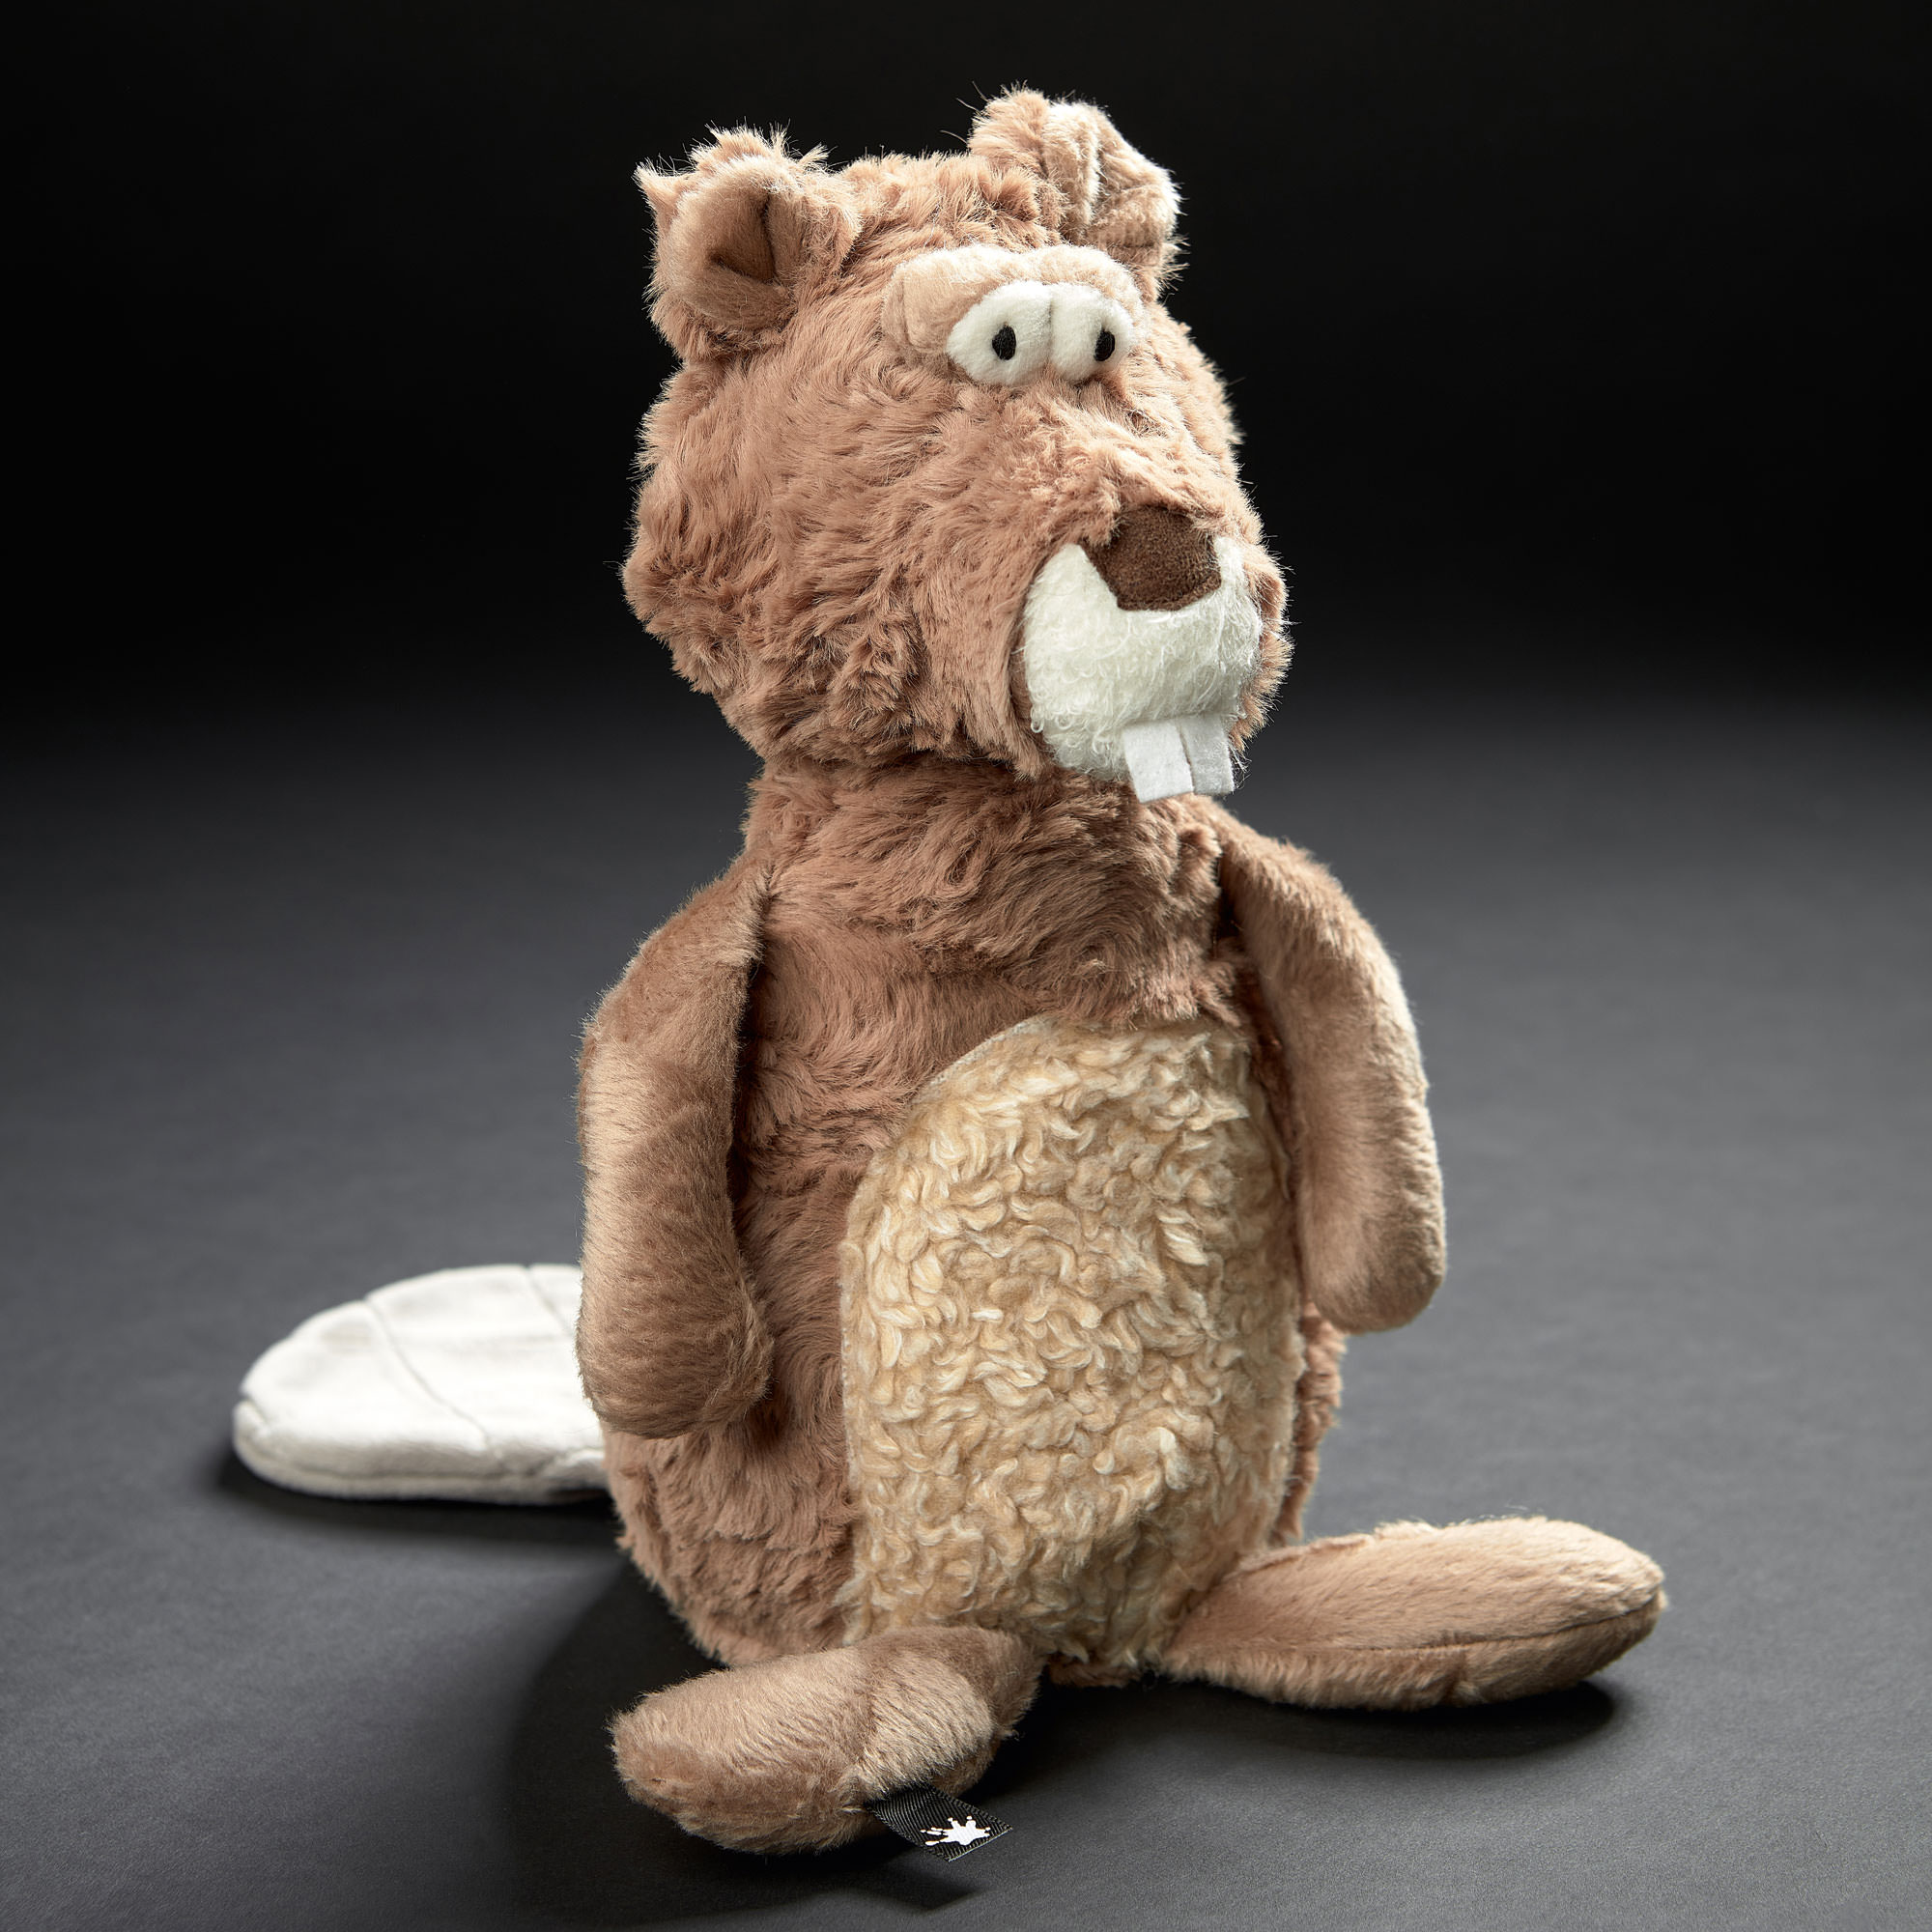 Plush toy beaver Co-Constructor, Beasts collection